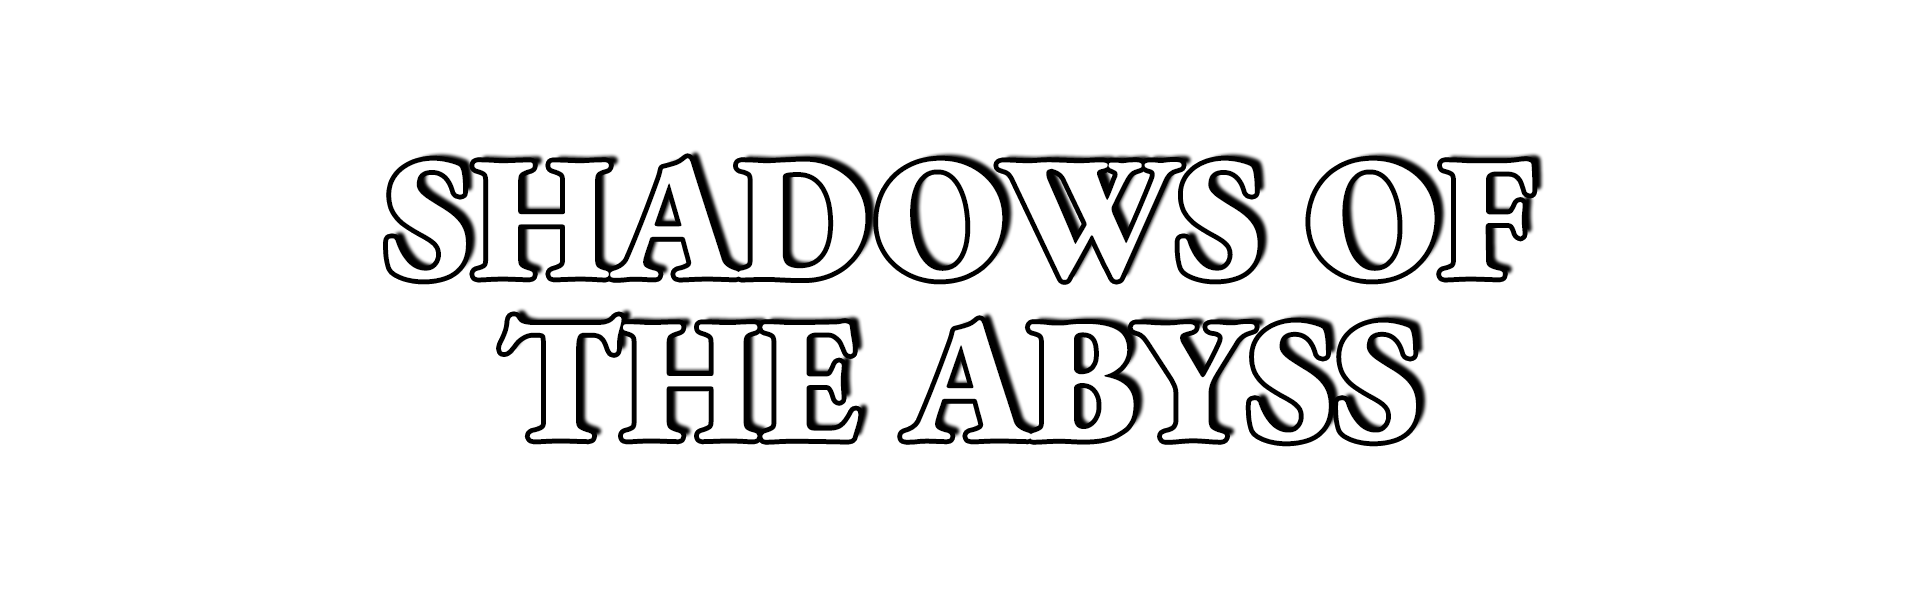 SHADOWS OF THE ABYSS